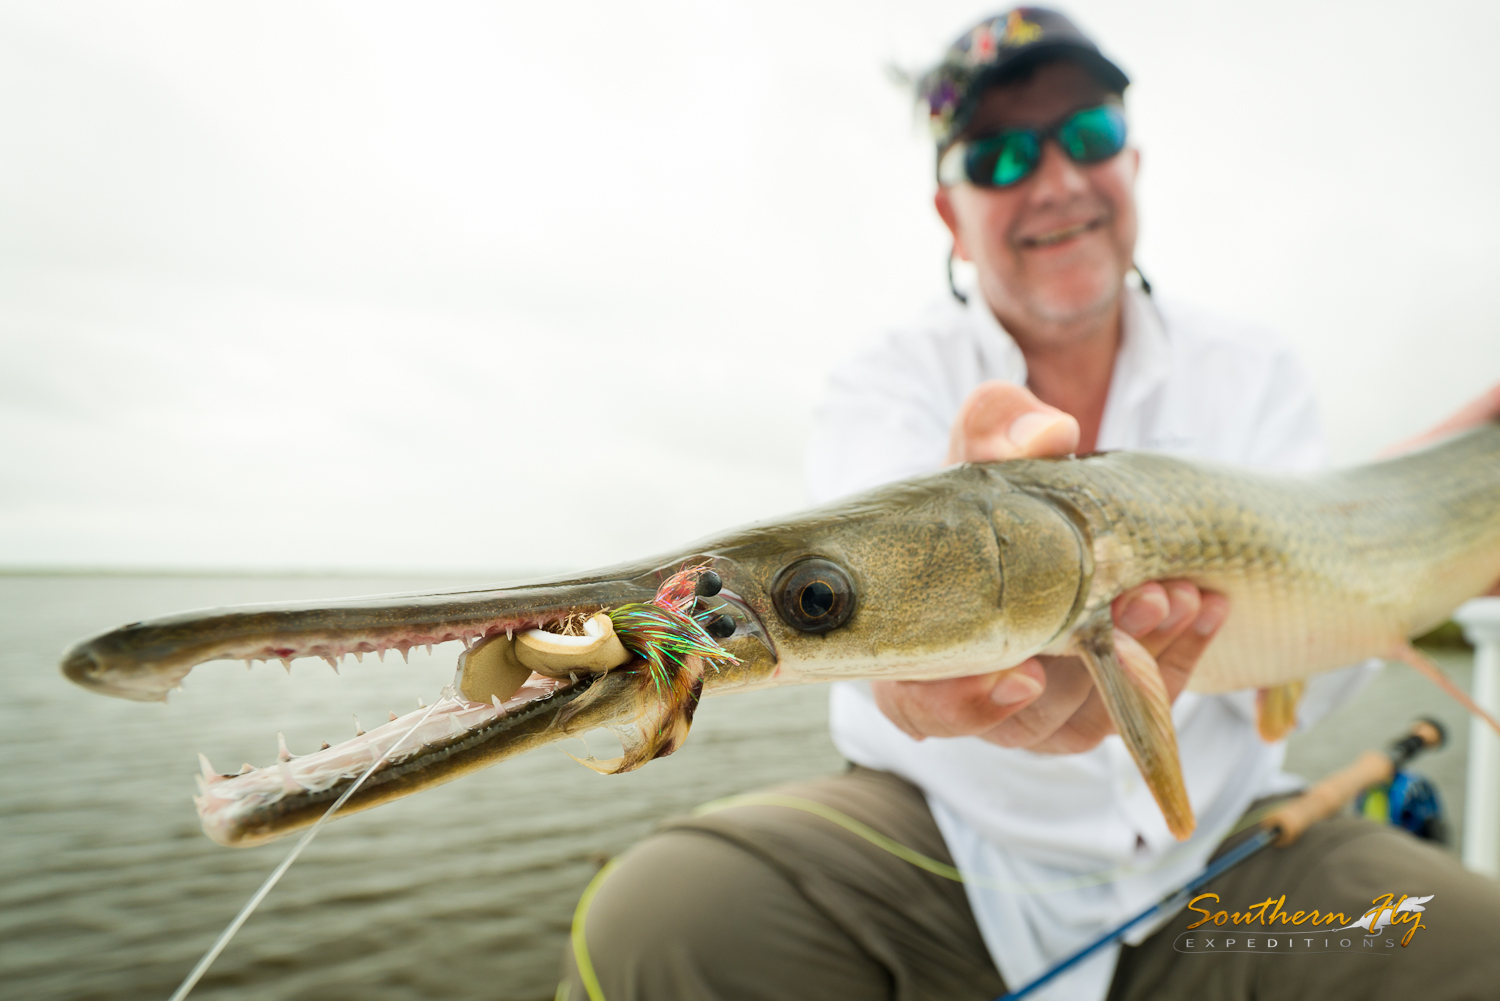 Anglers Fly Fishing Vacation New Orleans Spin Casting Louisiana Marsh